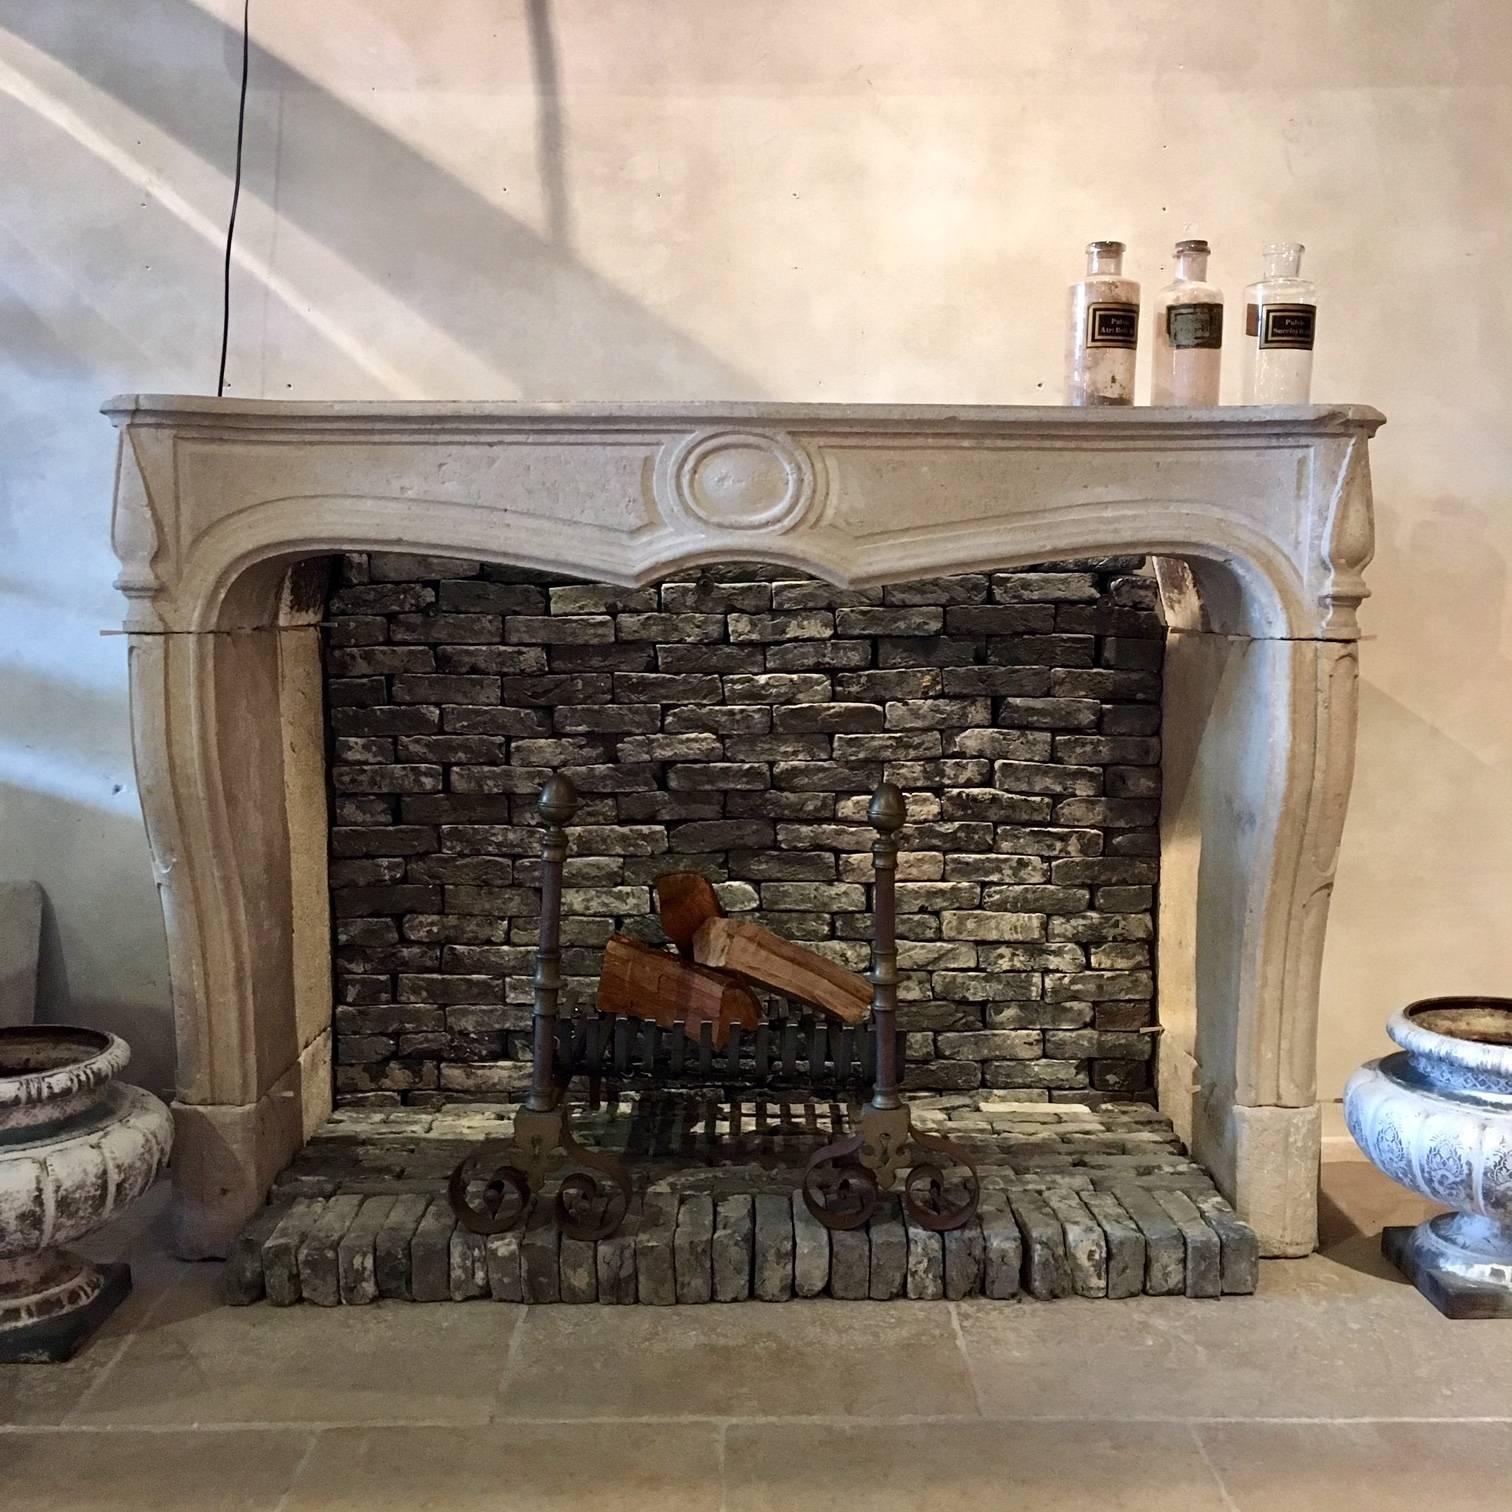 Beautiful fireplace made in France during Louis XIV reign. 

The fireplace is made out of Burgundian limestone, which is a very strong kind of limestone. 

The fireplace has a lovely design with a medaillon in the middle and decorative curves.